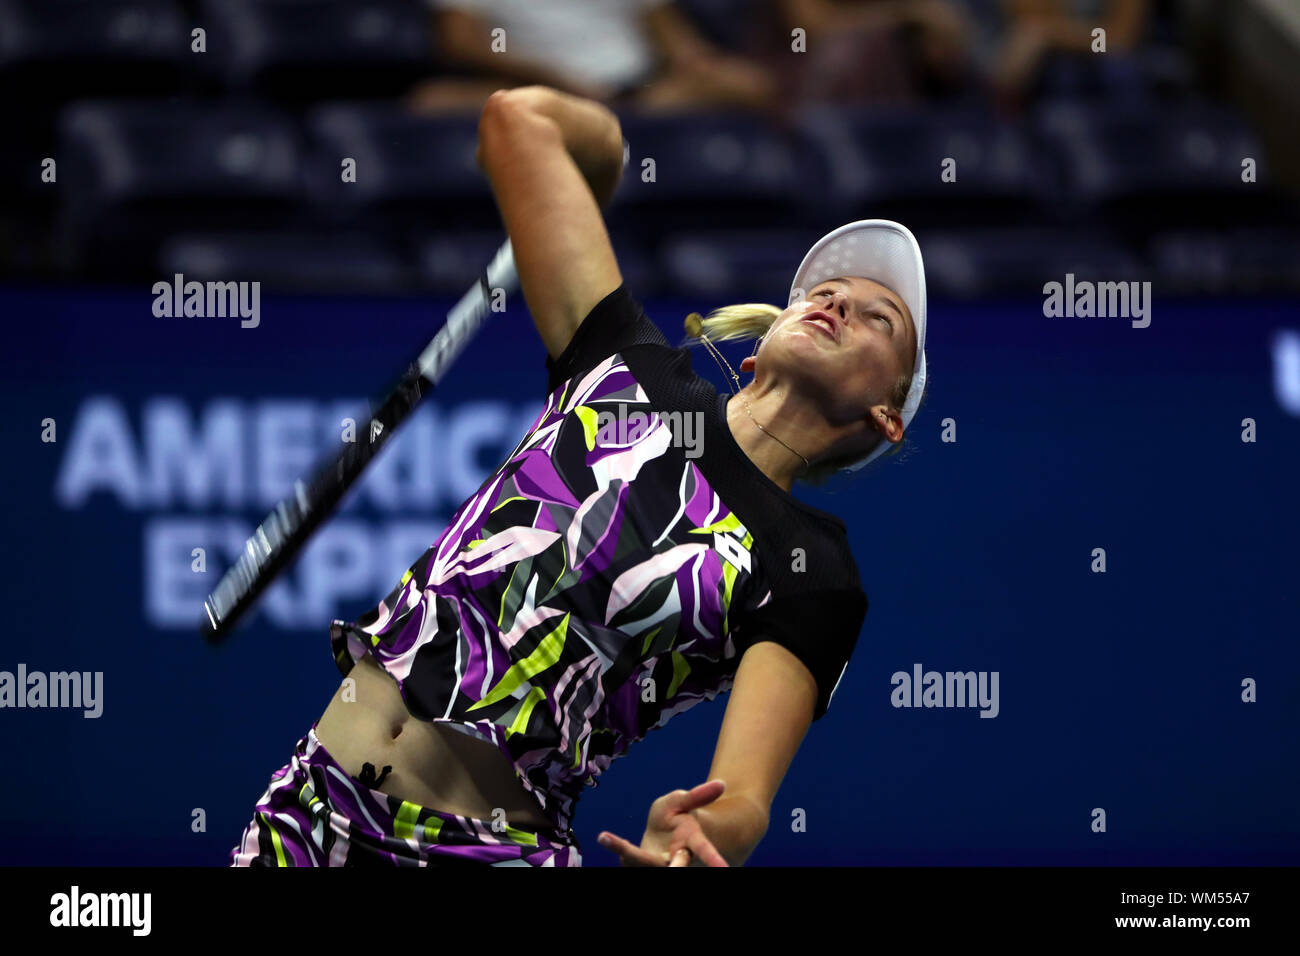 Flushing Meadows, New York, United States - September 4, 2019. Elise Mertens of Belgium serving to Bianca Andreescu of Canada during their quarterfinal match at the US Open today.   Andreescu won in three sets to advance to the semi finals. Credit: Adam Stoltman/Alamy Live News Stock Photo